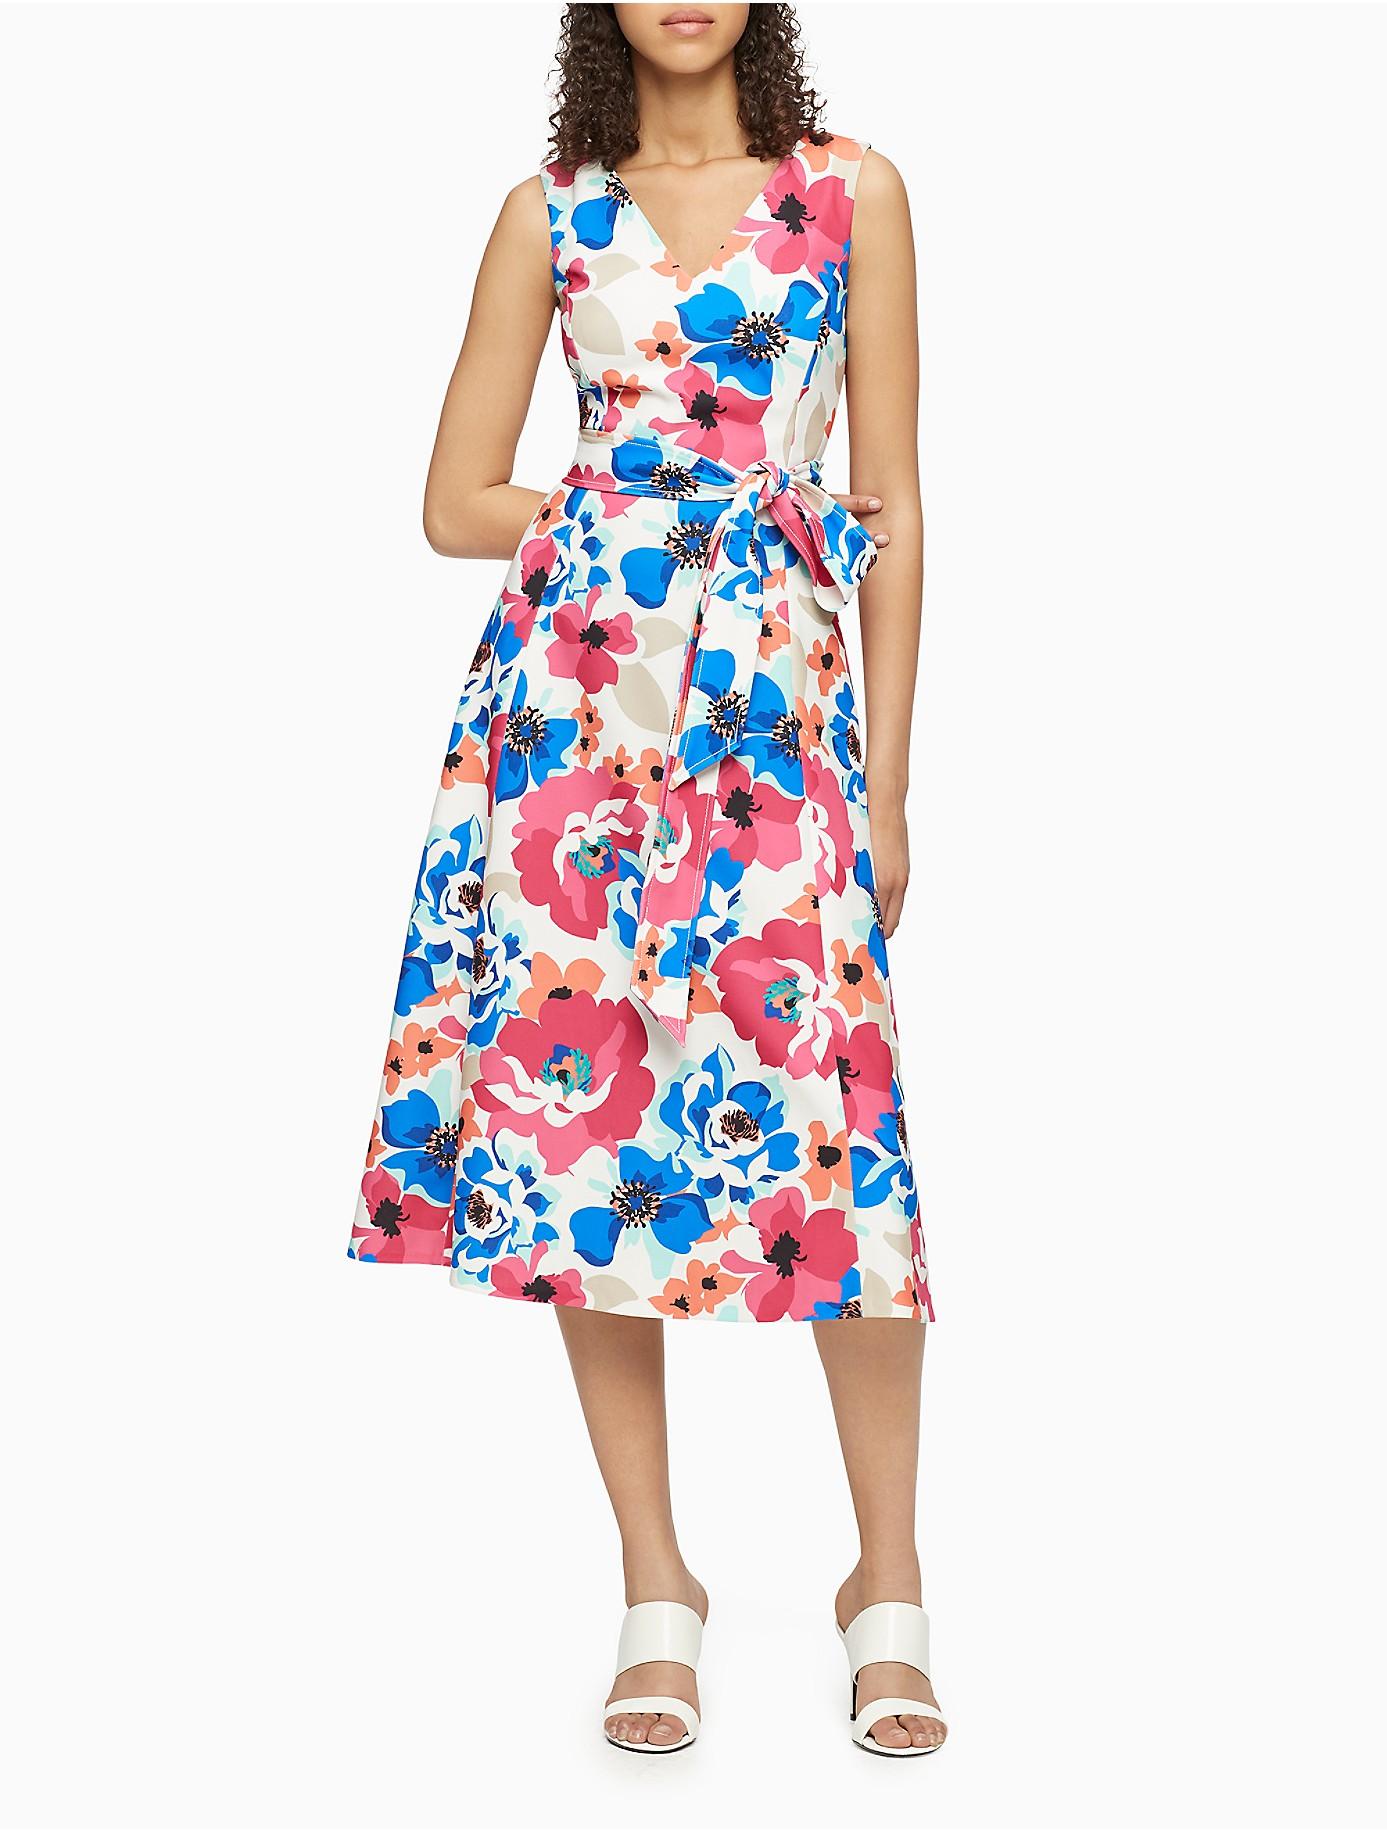 Calvin Klein Synthetic Floral V-neck Tie Waist A-line Dress in Blue - Lyst